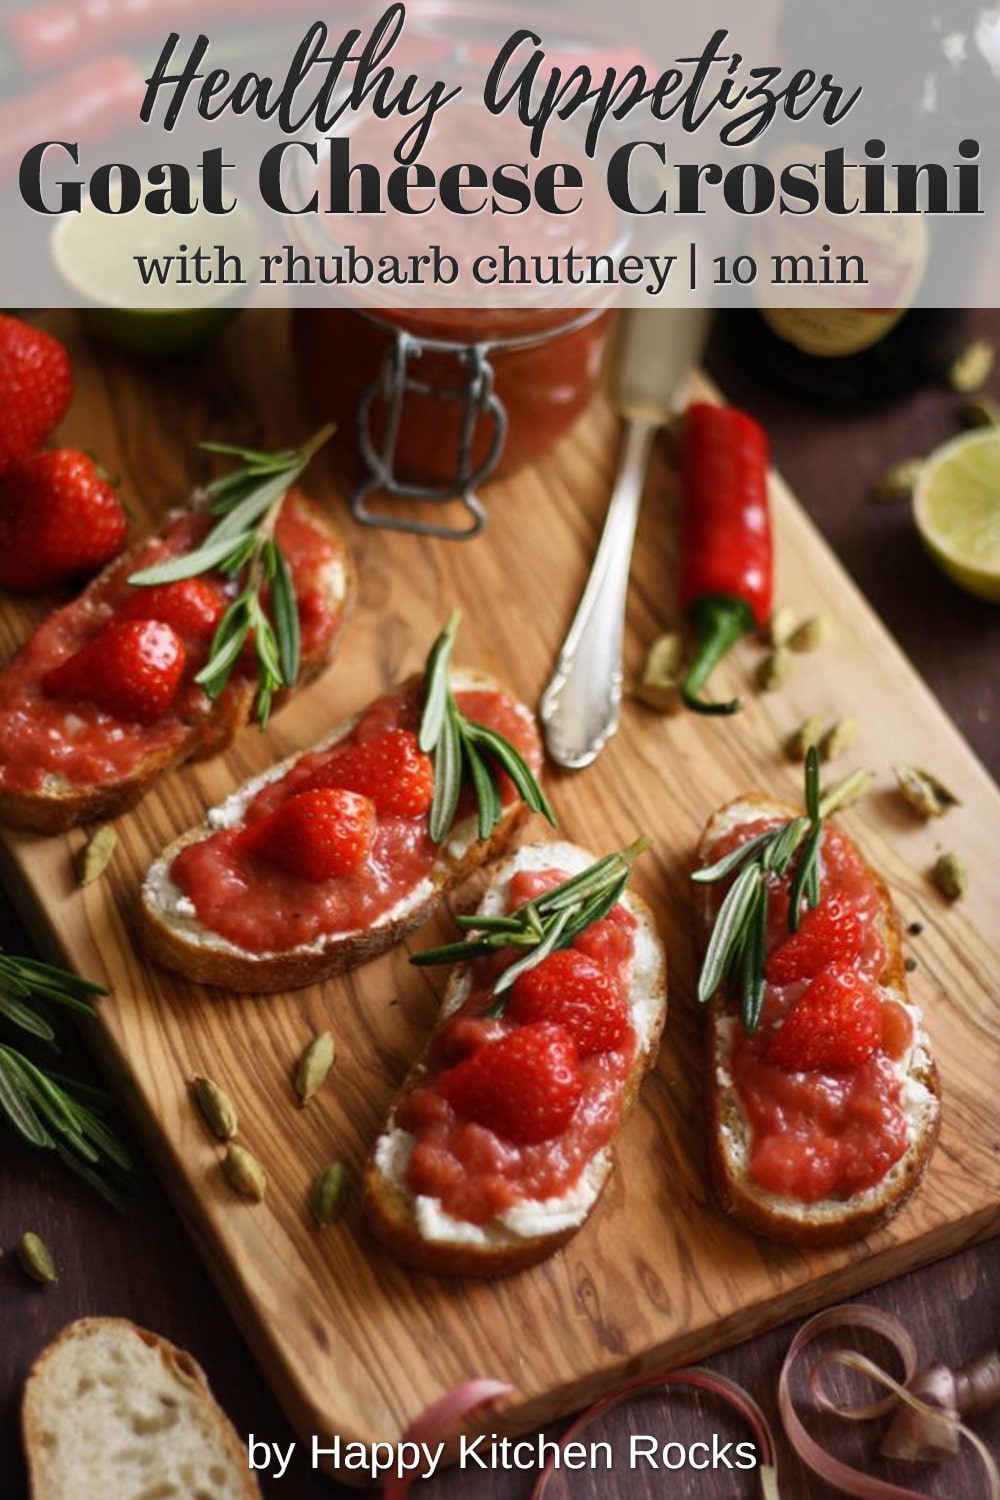 Goat Cheese Crostini with Rhubarb Chutney Collage with Text Overlay